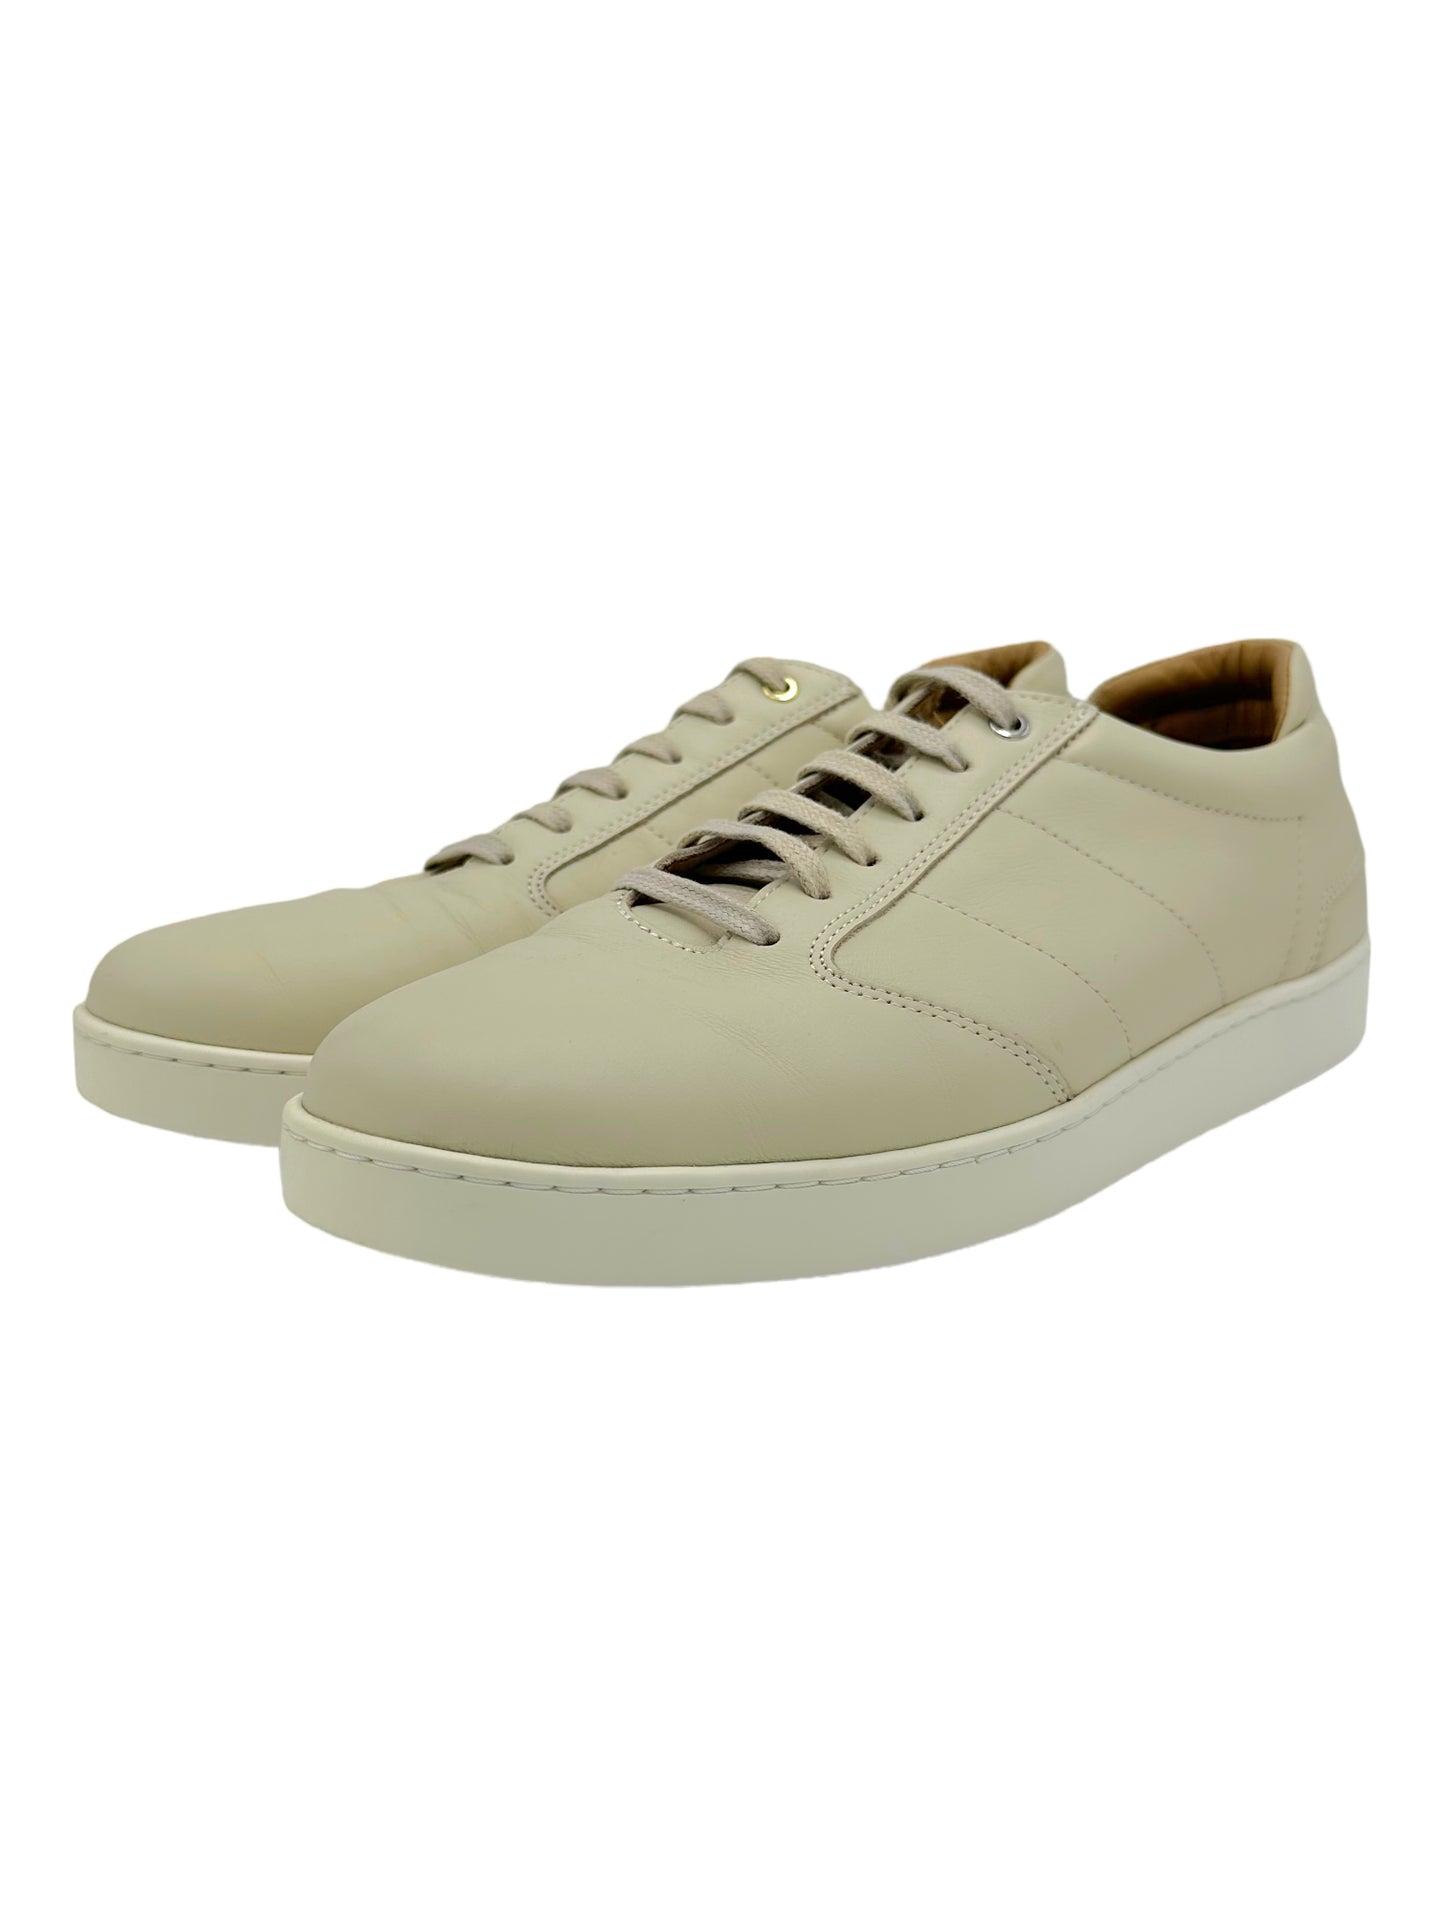 WANT Les Essentiels Cream Casual Sneaker - Genuine Design luxury consignment Calgary, Canada New and pre-owned clothing, shoes, accessories.